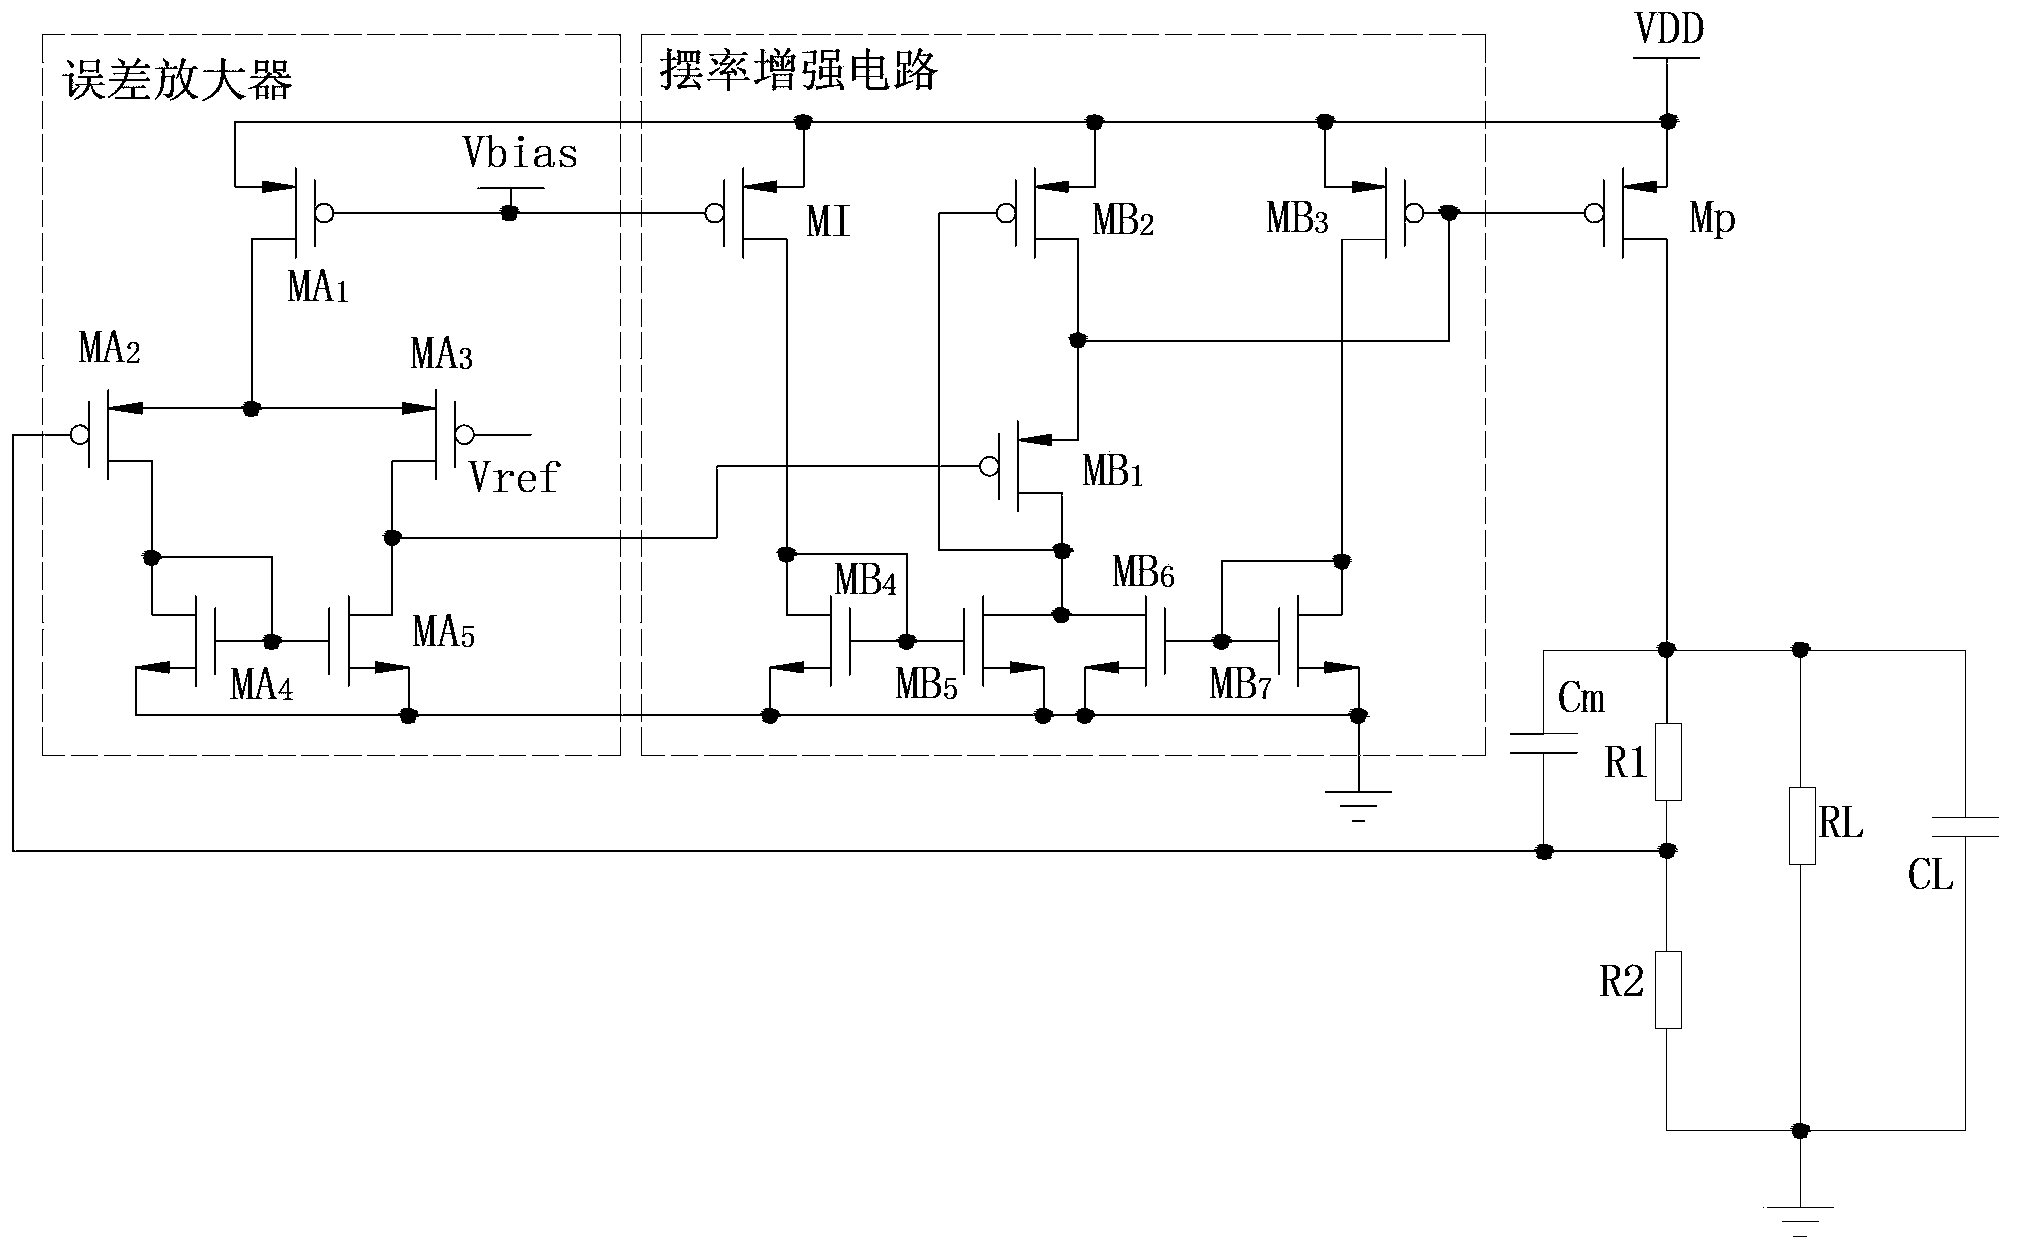 Low dropout regulator (LDO) integrated with slew rate intensifier circuit